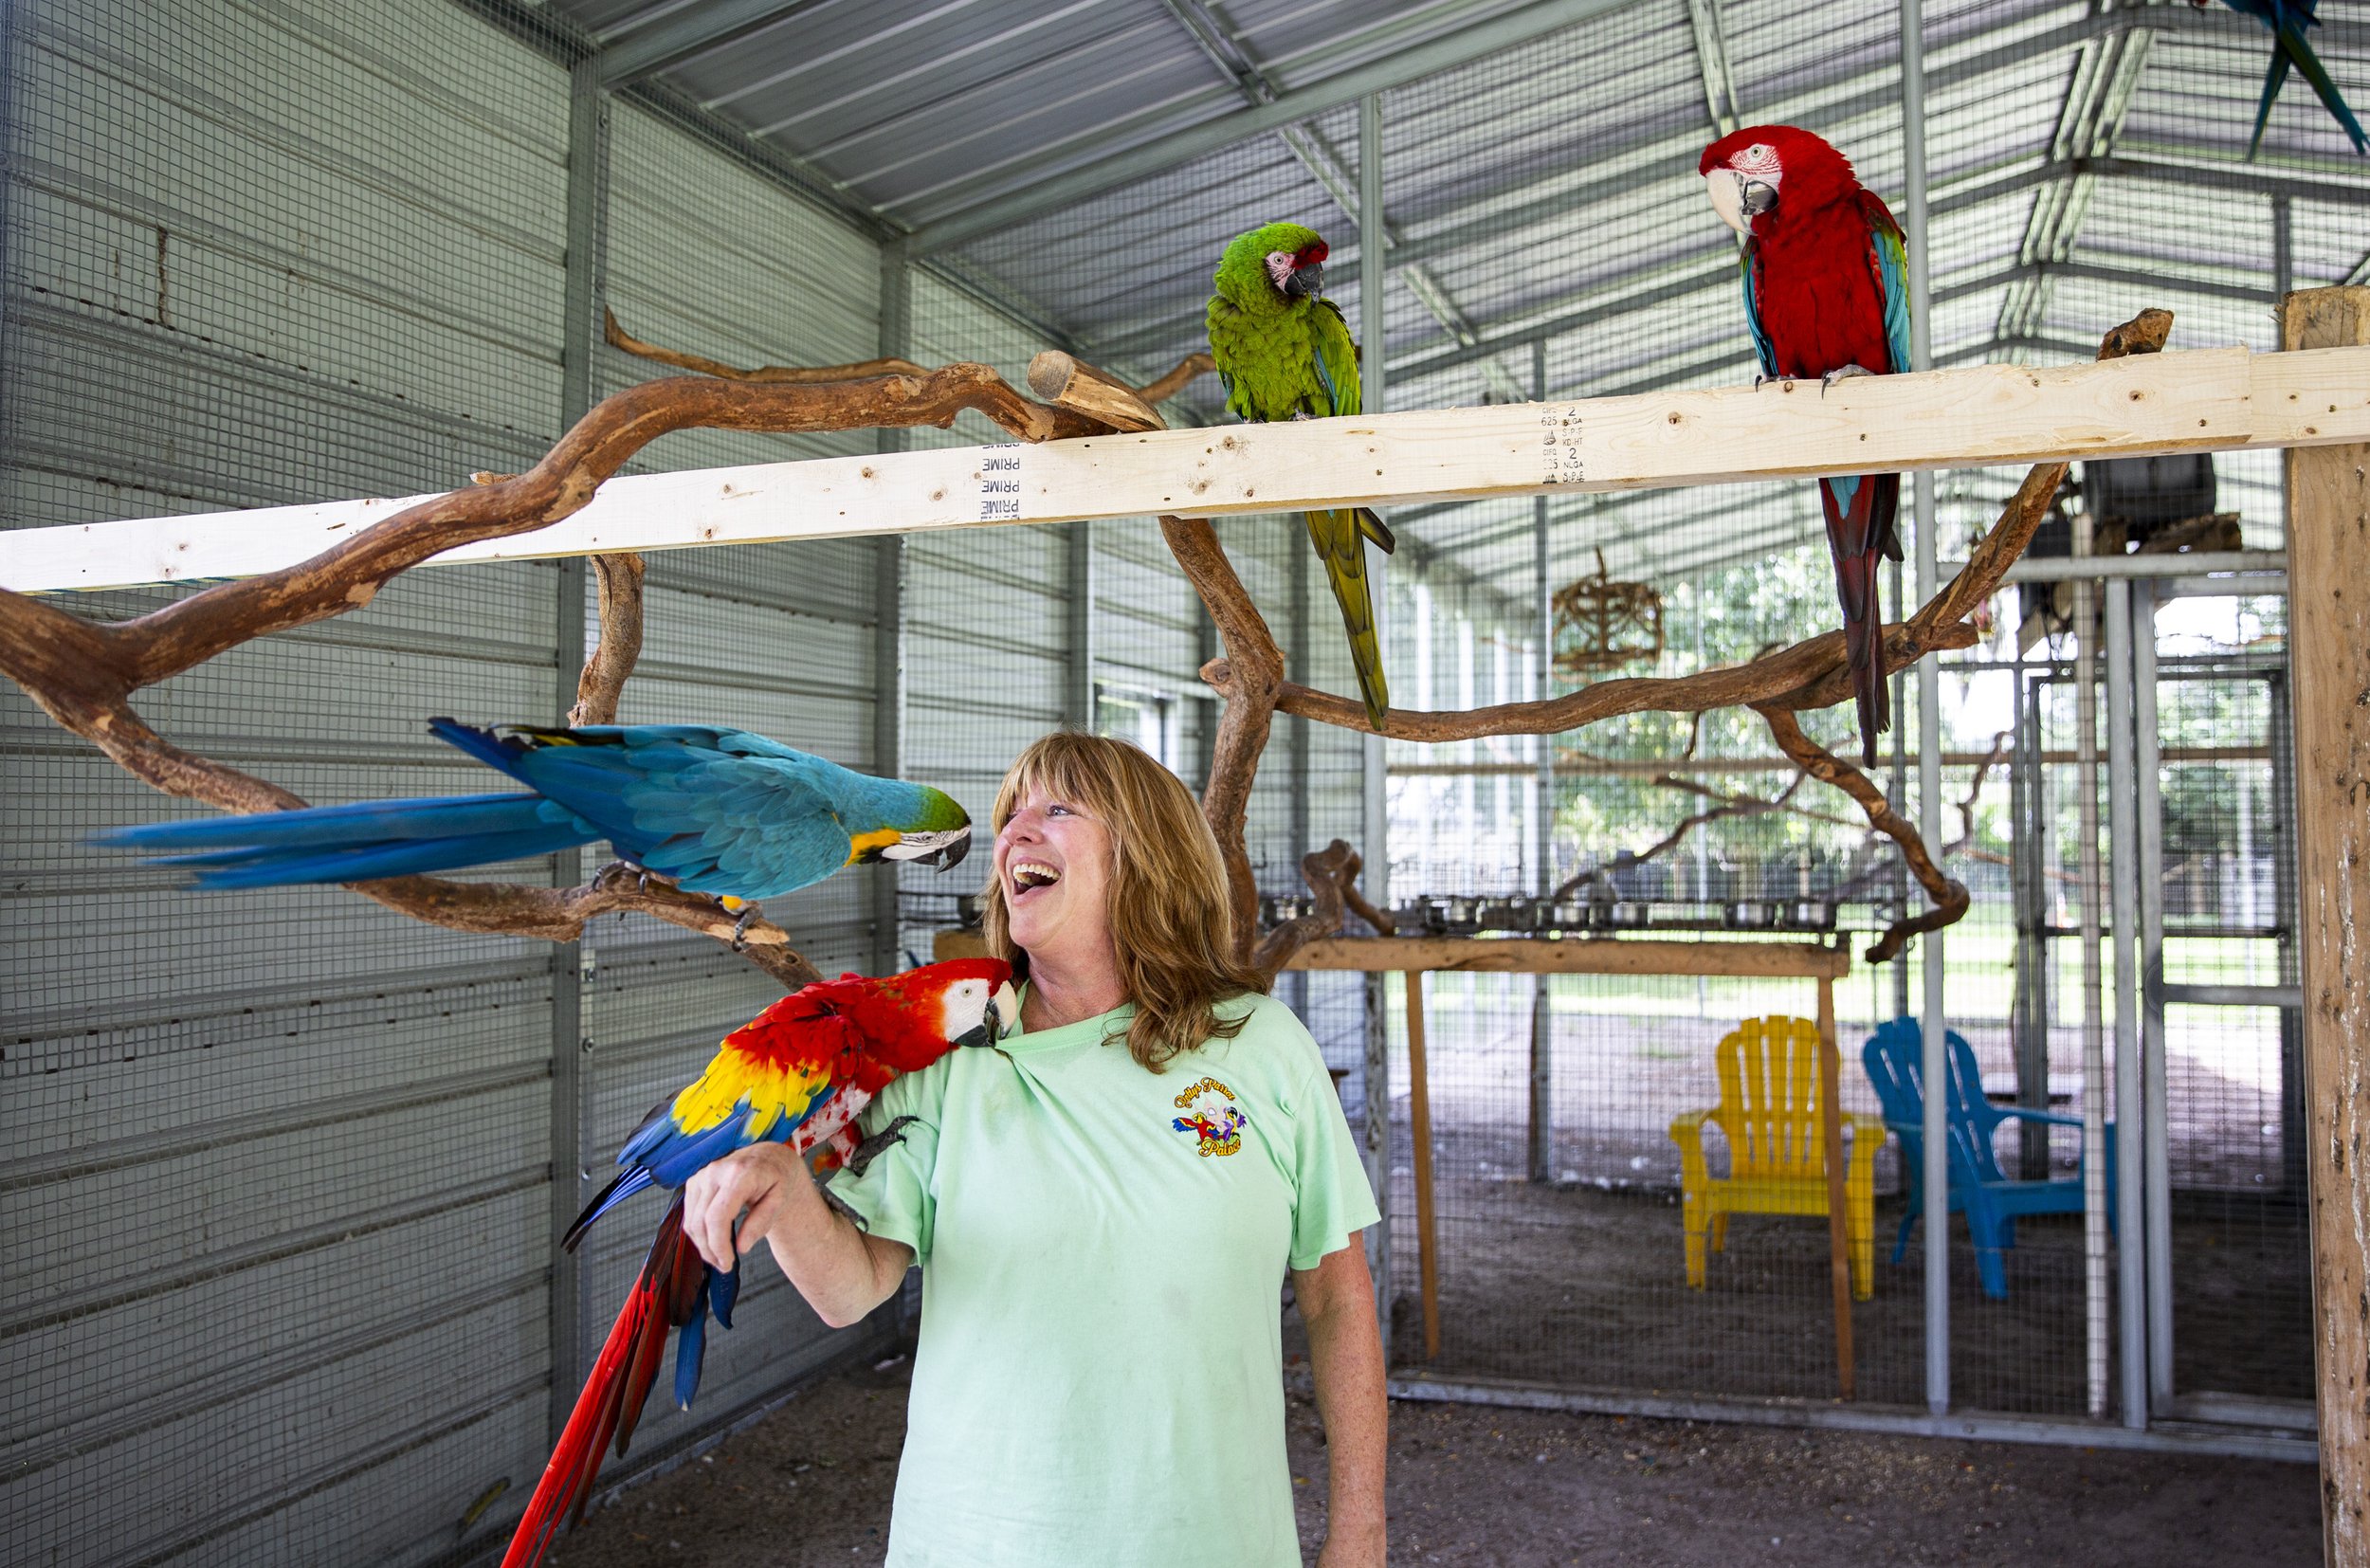  Patricia Koile, founder Patty's Parrot Palace, greets her macaws at her home and bird sanctuary in DeLand on Monday, Aug. 5, 2019.  